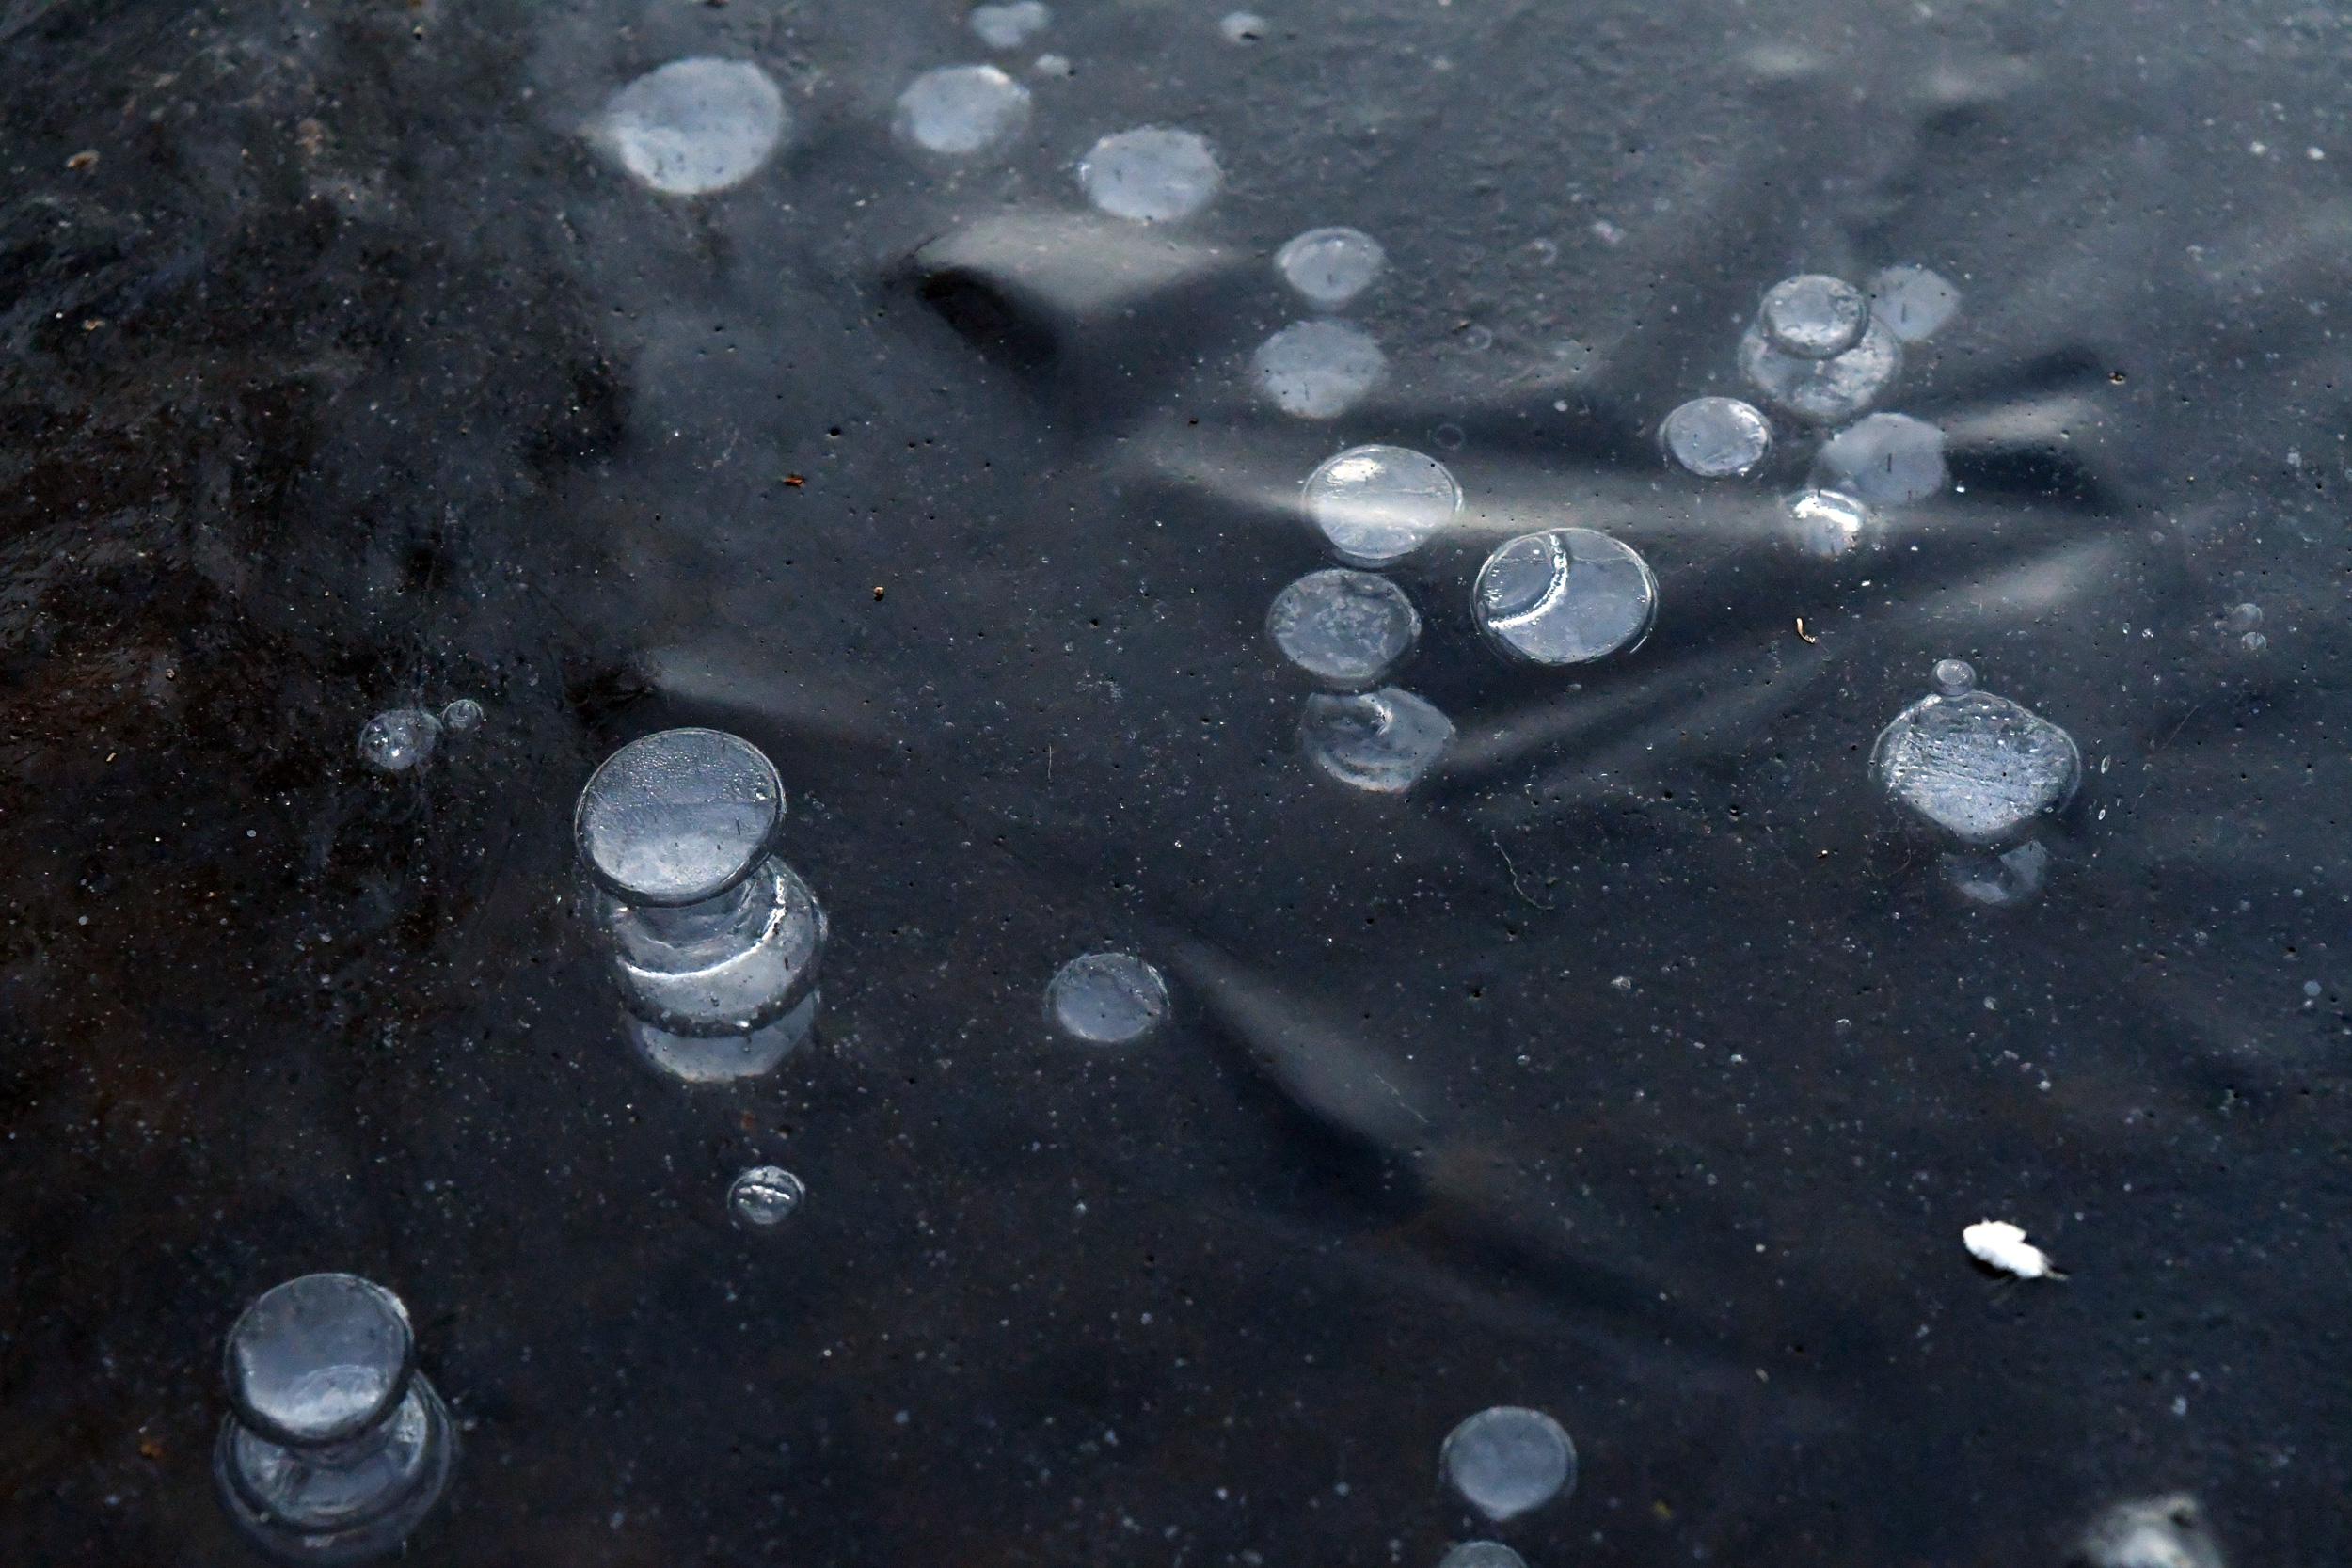 Bubbles in ice, Lullwater, Prospect Park